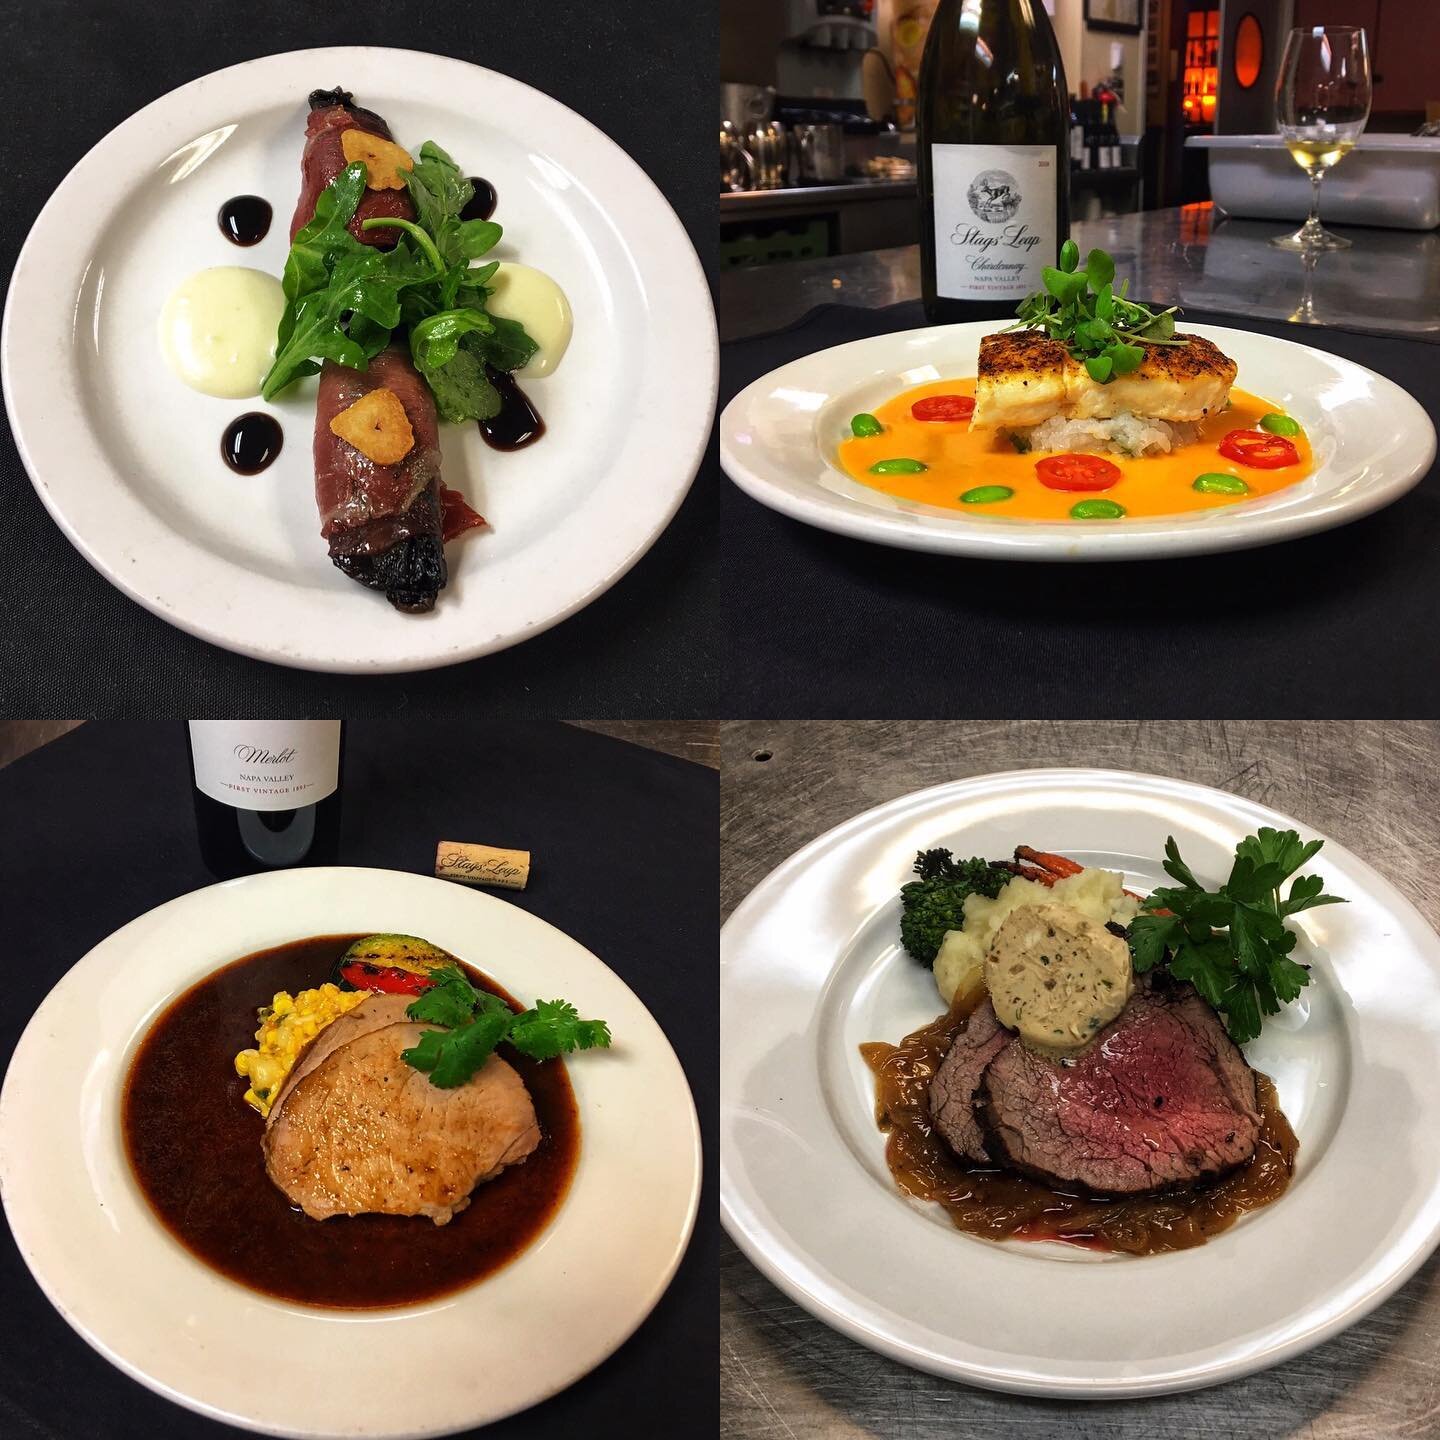 Last night&rsquo;s Food &amp; Wine Dinner featuring @stagsleapwinery! Number 187 in the books and what a fantastic evening it was. 

Join us for the next one on September 22nd as welcome @cakebreadcellars